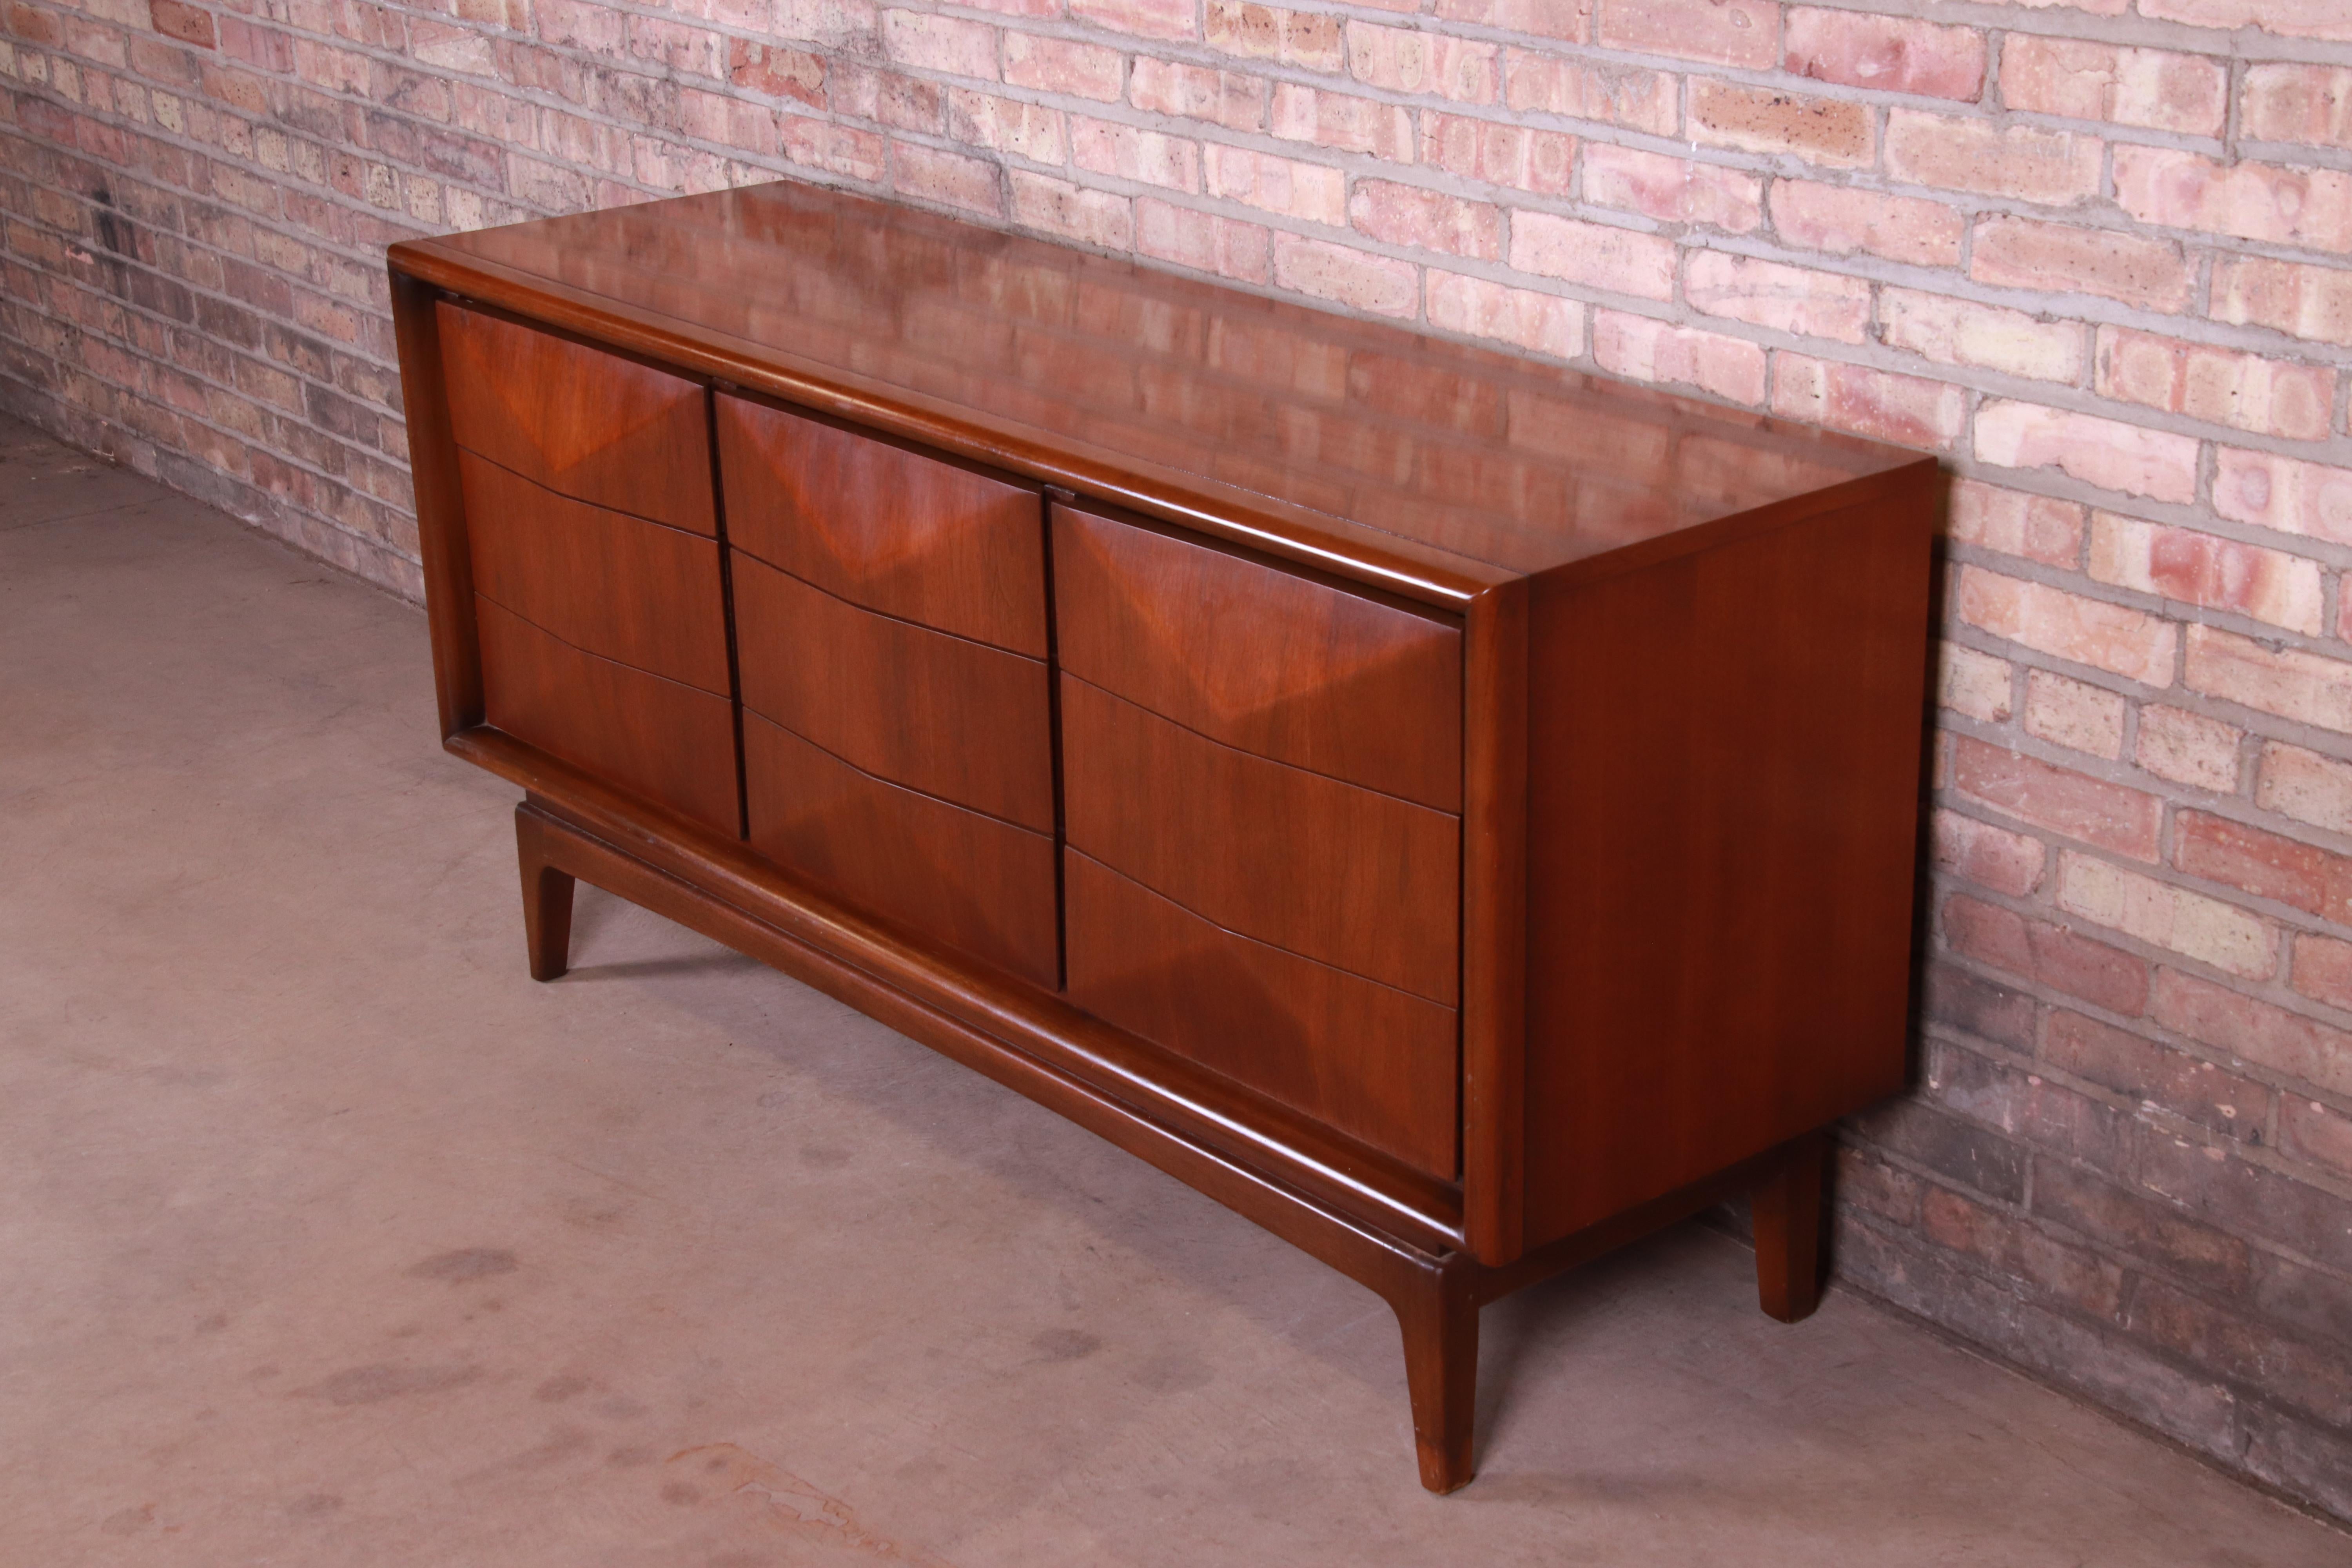 Mid-20th Century Mid-Century Modern Sculpted Walnut Diamond Front Dresser or Credenza by United